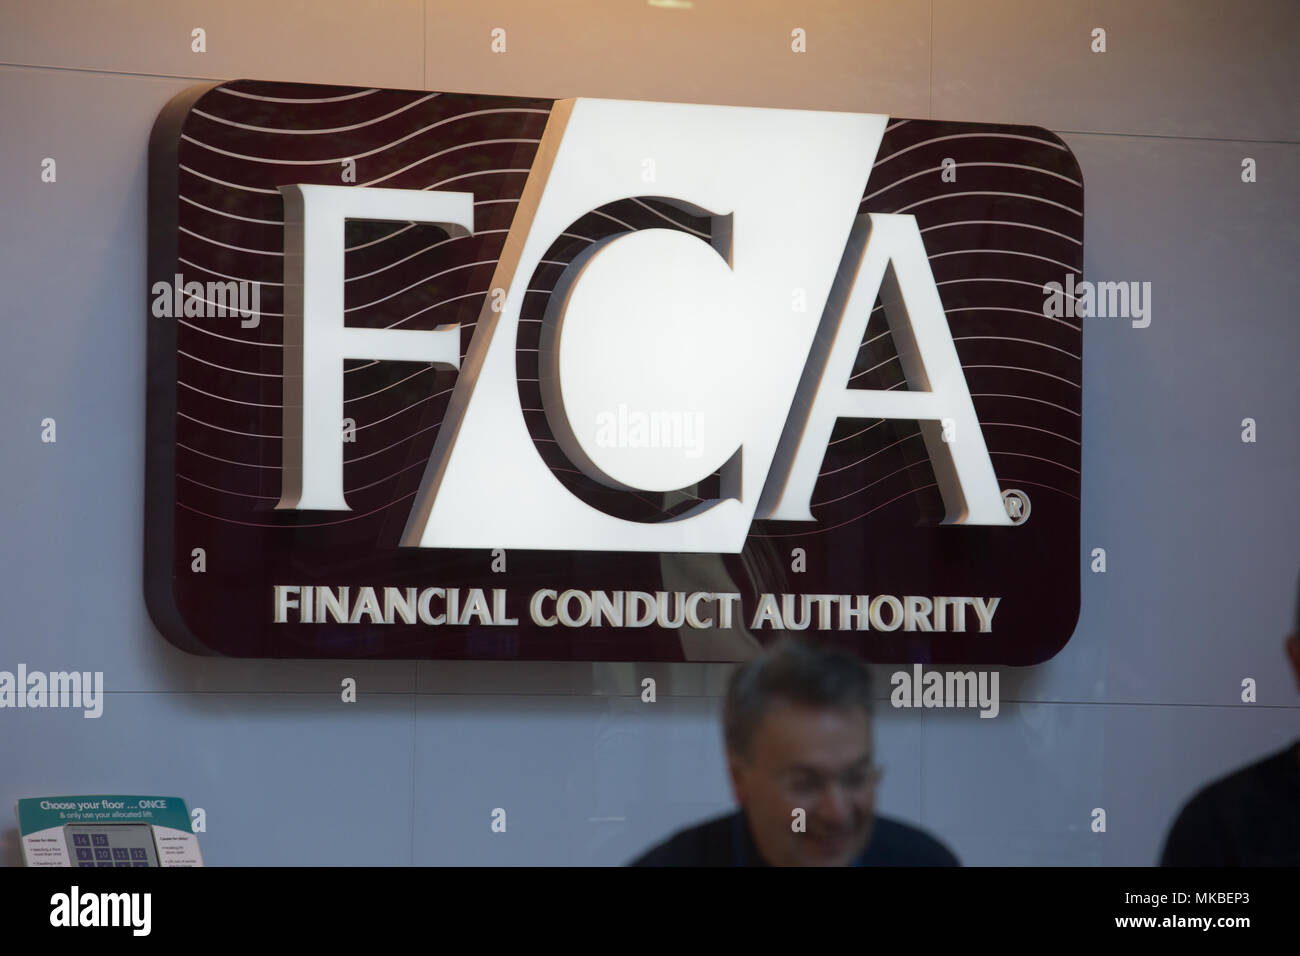 Financial Conduct Authority (FCA) offices, North Colonnade, Docklands, London. Employees exiting through security gates at lunchtime. Stock Photo